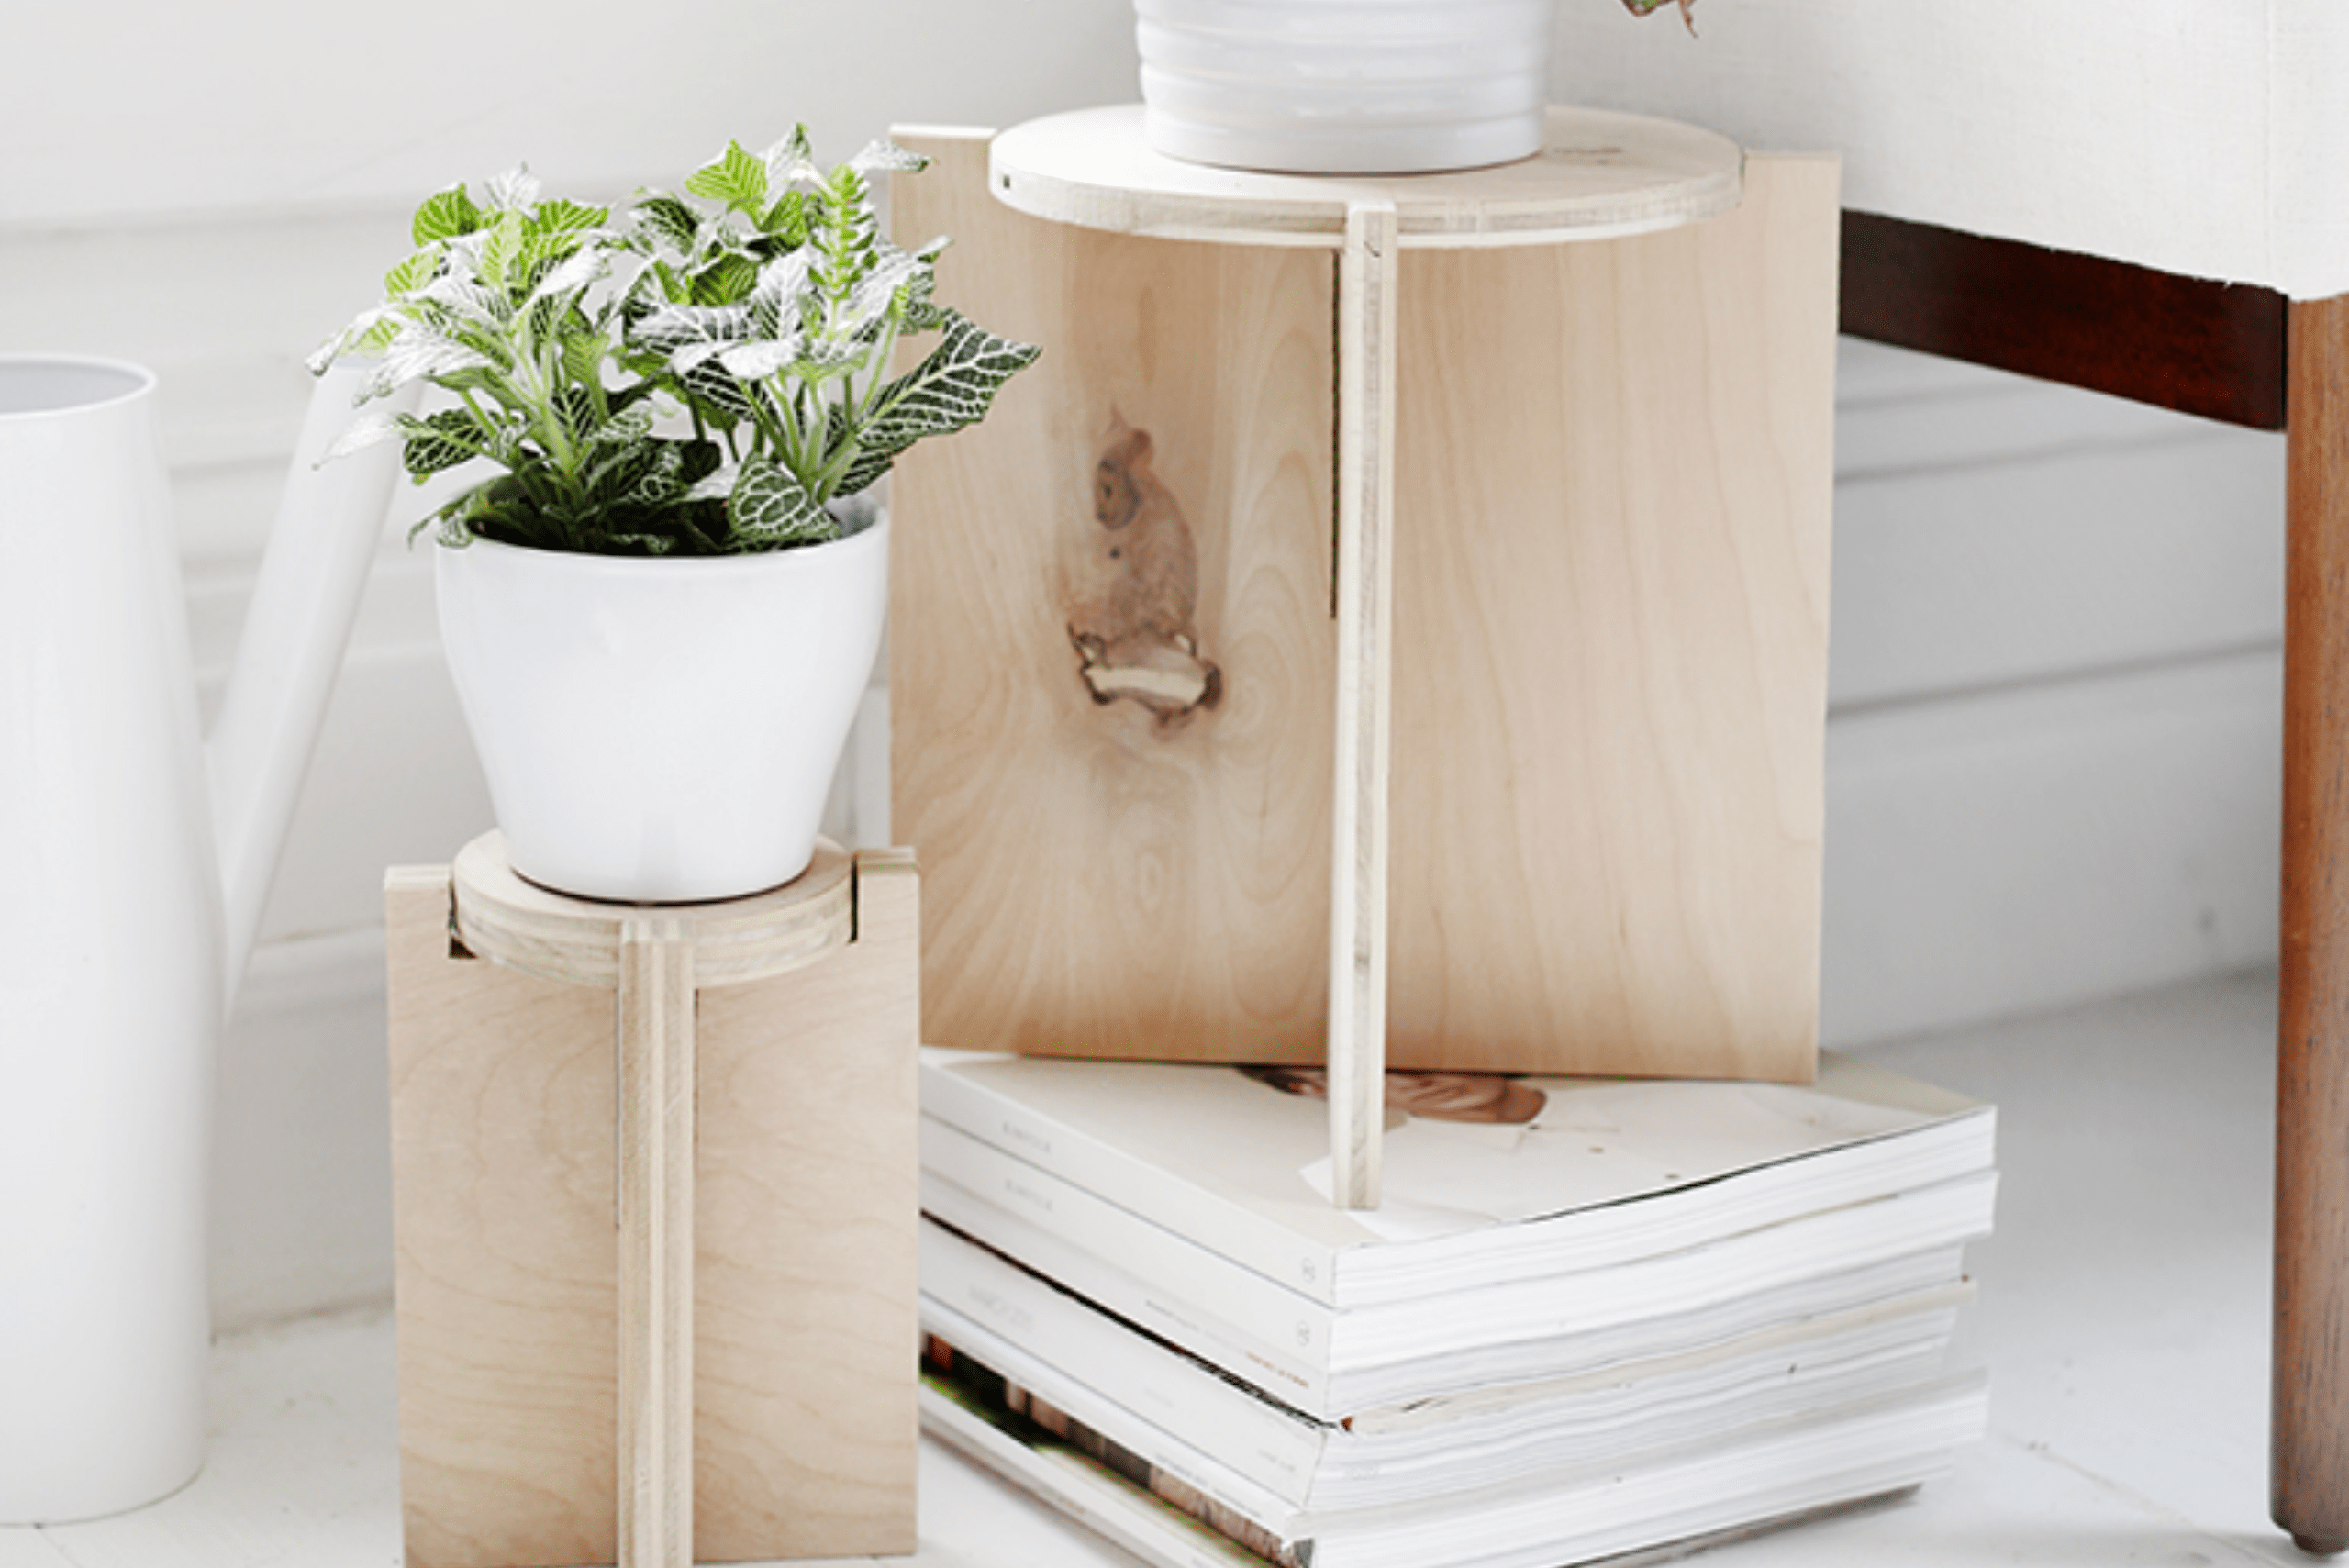 Plant stand made of plywood holding plants in white pots.